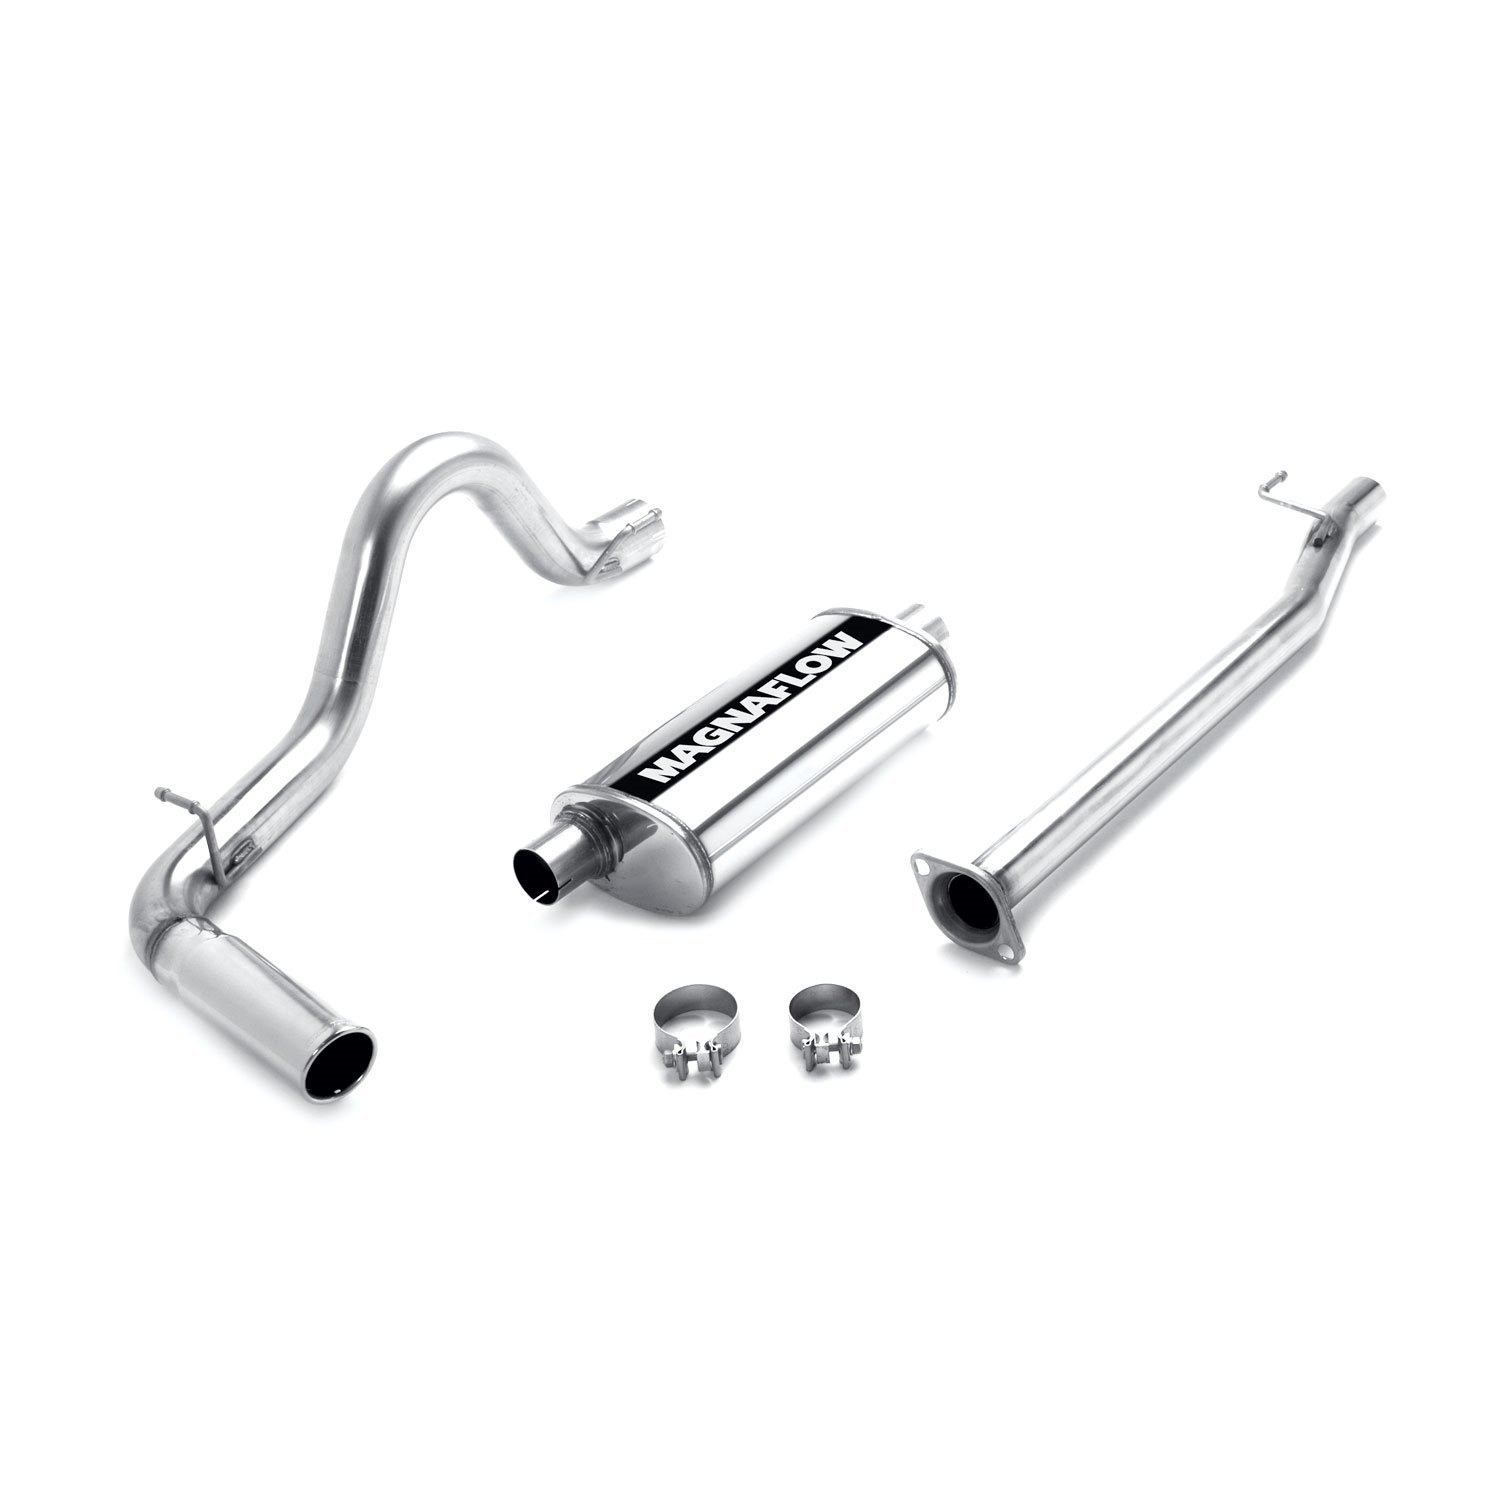 MF Series Cat-Back Exhaust System 2005-12 Tacoma 2.7L (Ext./Crew Cab, 60.3" Bed)